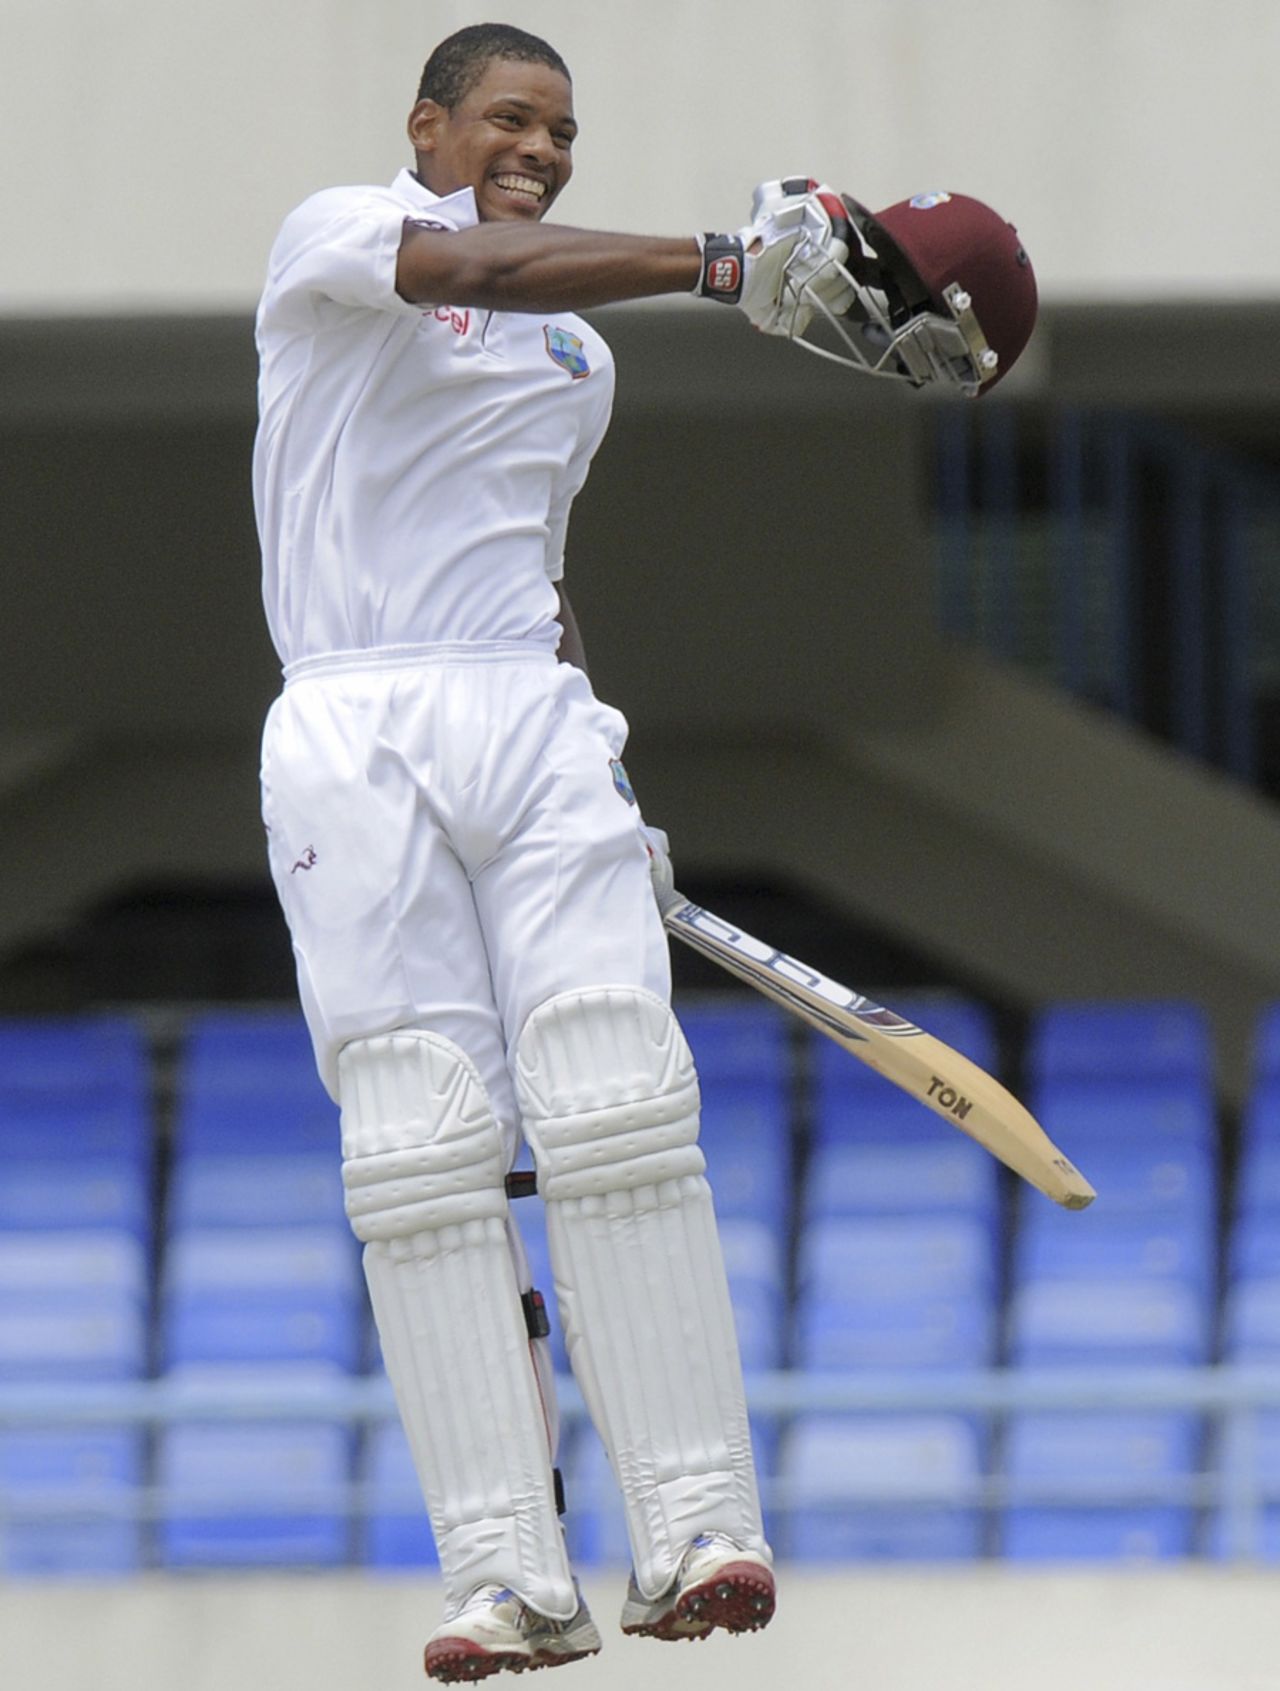 Kieran Powell celebrates after reaching his maiden Test century, West Indies v New Zealand, 1st Test, Antigua, 3rd day, July 27, 2012